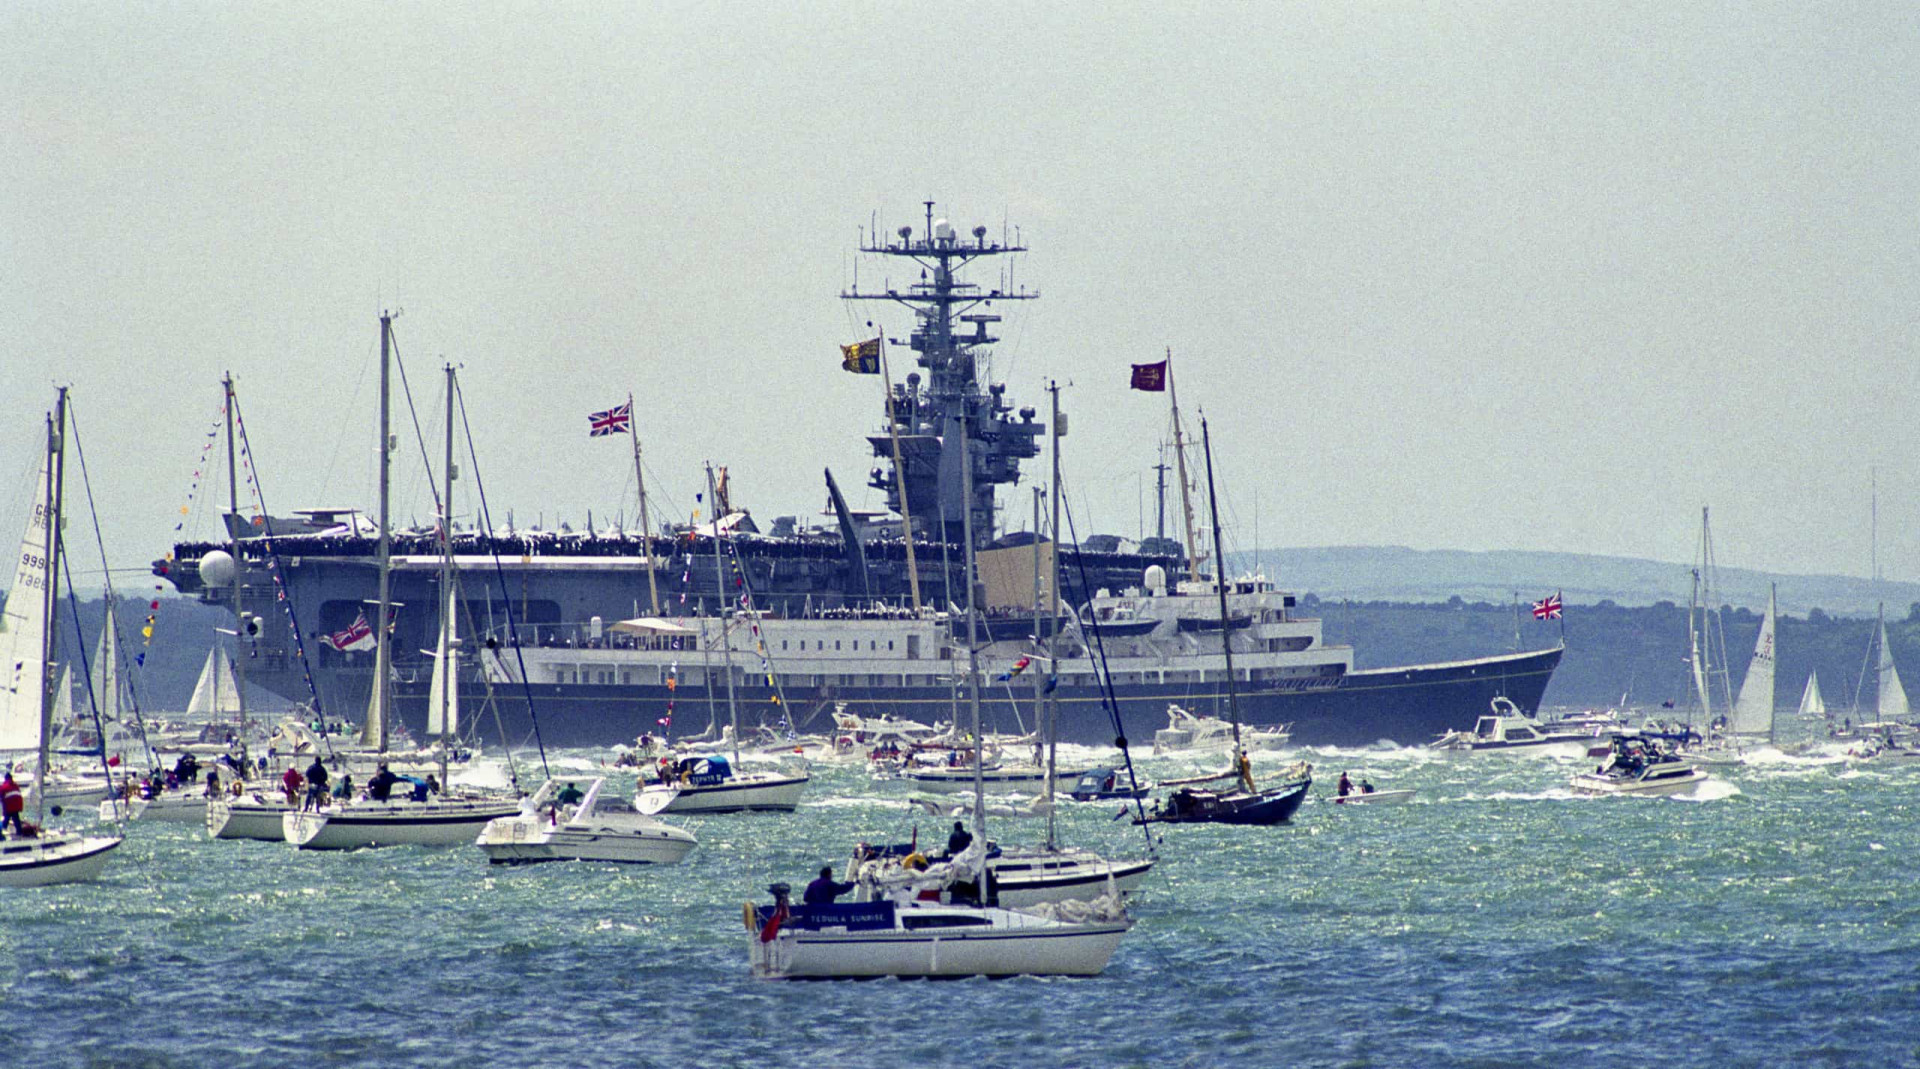 <p>June 6, 1994 marked the 50th anniversary of the D-Day landings in Normandy. To mark the historic occasion, <em>Britannia</em> and her royal passengers joined a colorful fleet review off Portsmouth and Gosport, in southern England.</p><p>You may also like:<a href="https://www.starsinsider.com/n/425531?utm_source=msn.com&utm_medium=display&utm_campaign=referral_description&utm_content=474709v1en-us"> Take the coronavirus quiz: Are you overreacting or being safe?</a></p>